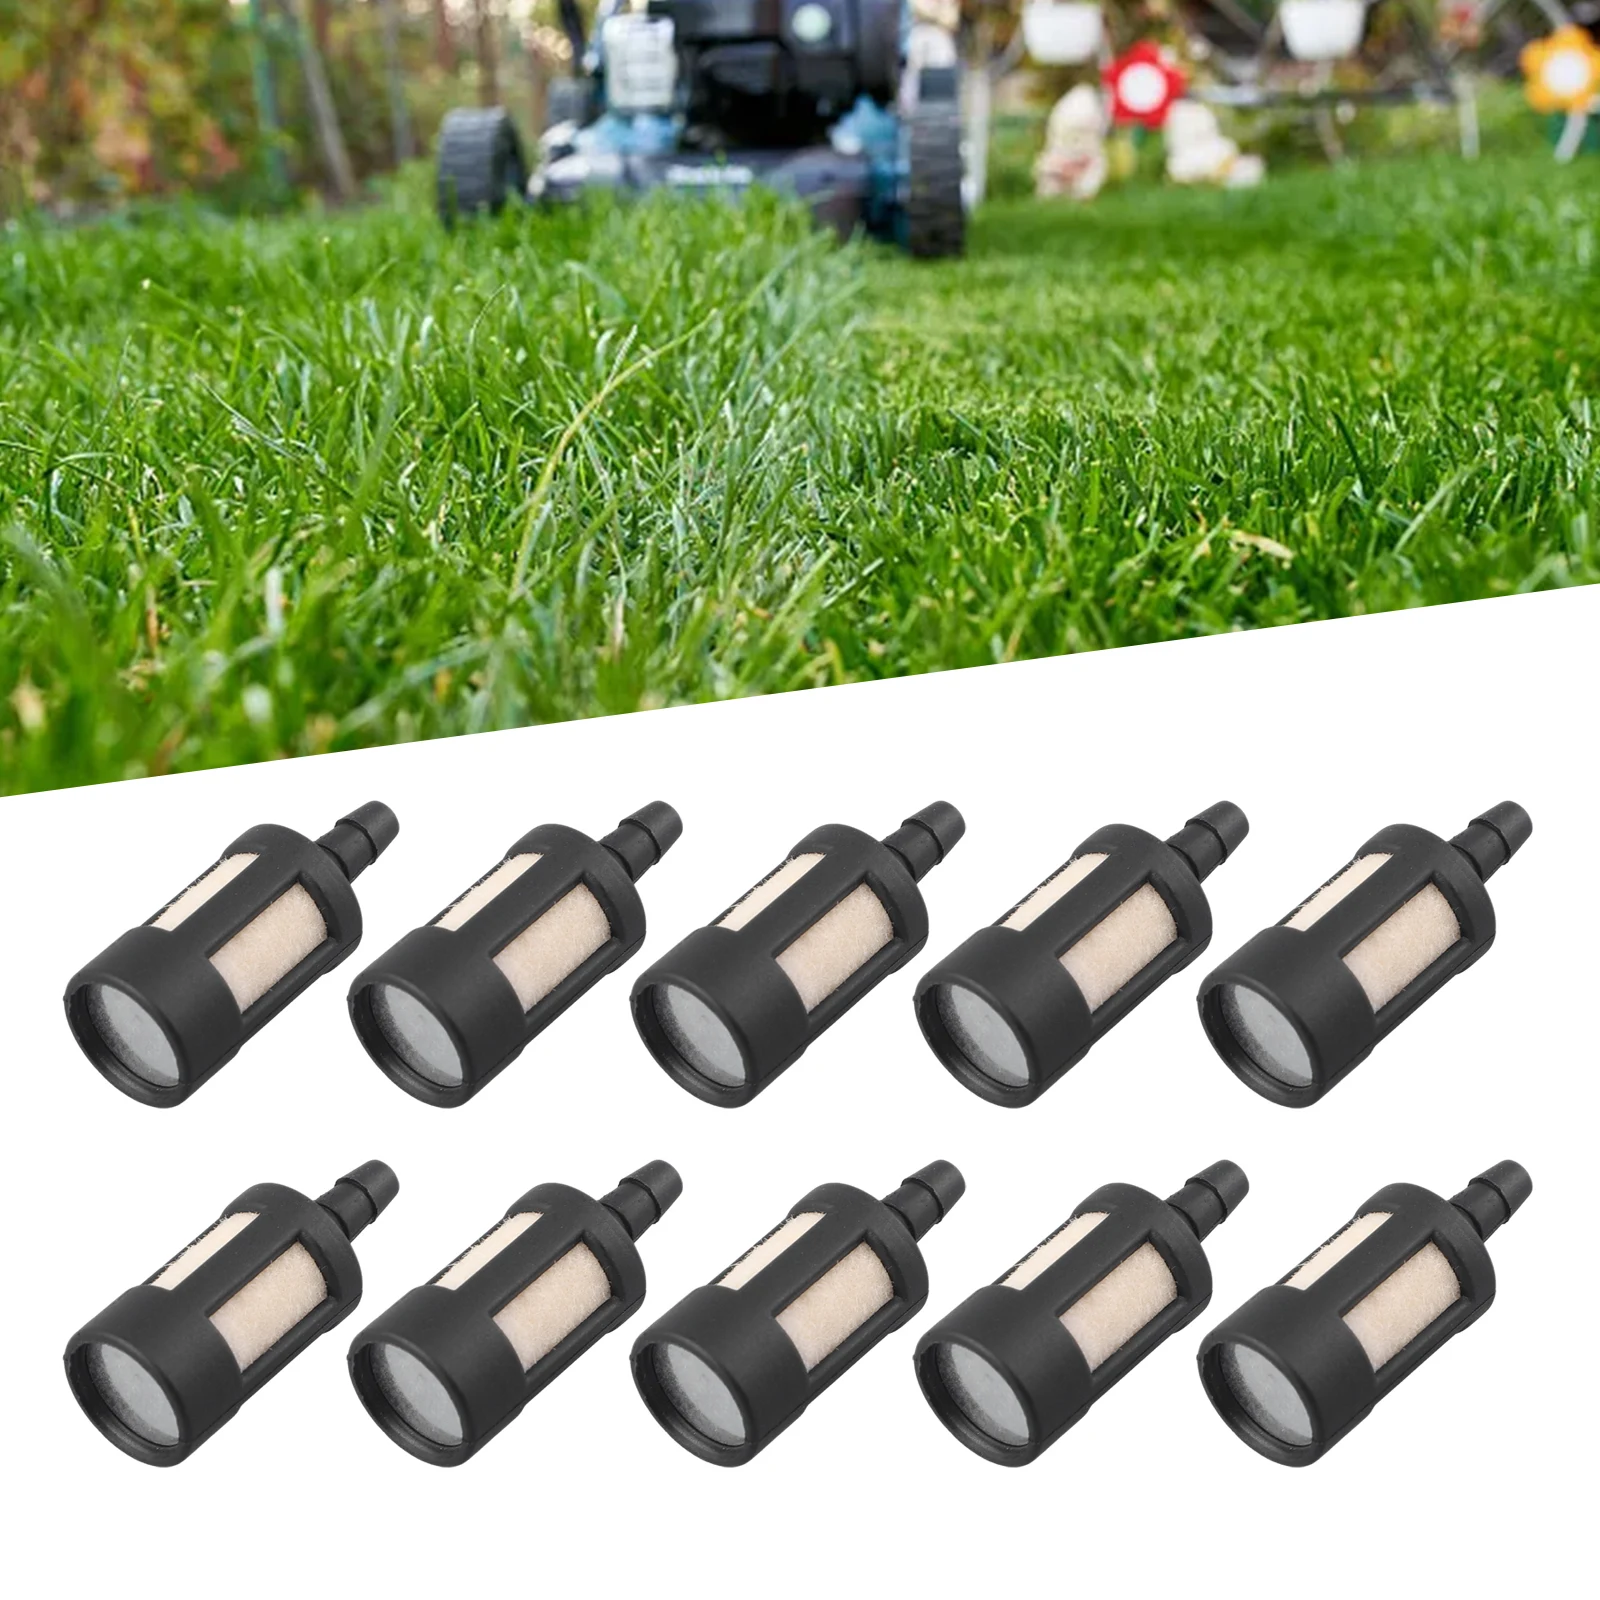 

10PCS General Fuel Filters Kit For Gasoline Garden Grass Trimmer Chainsaw For 1/8" ID FUEL LINE Garden Power Tool Parts